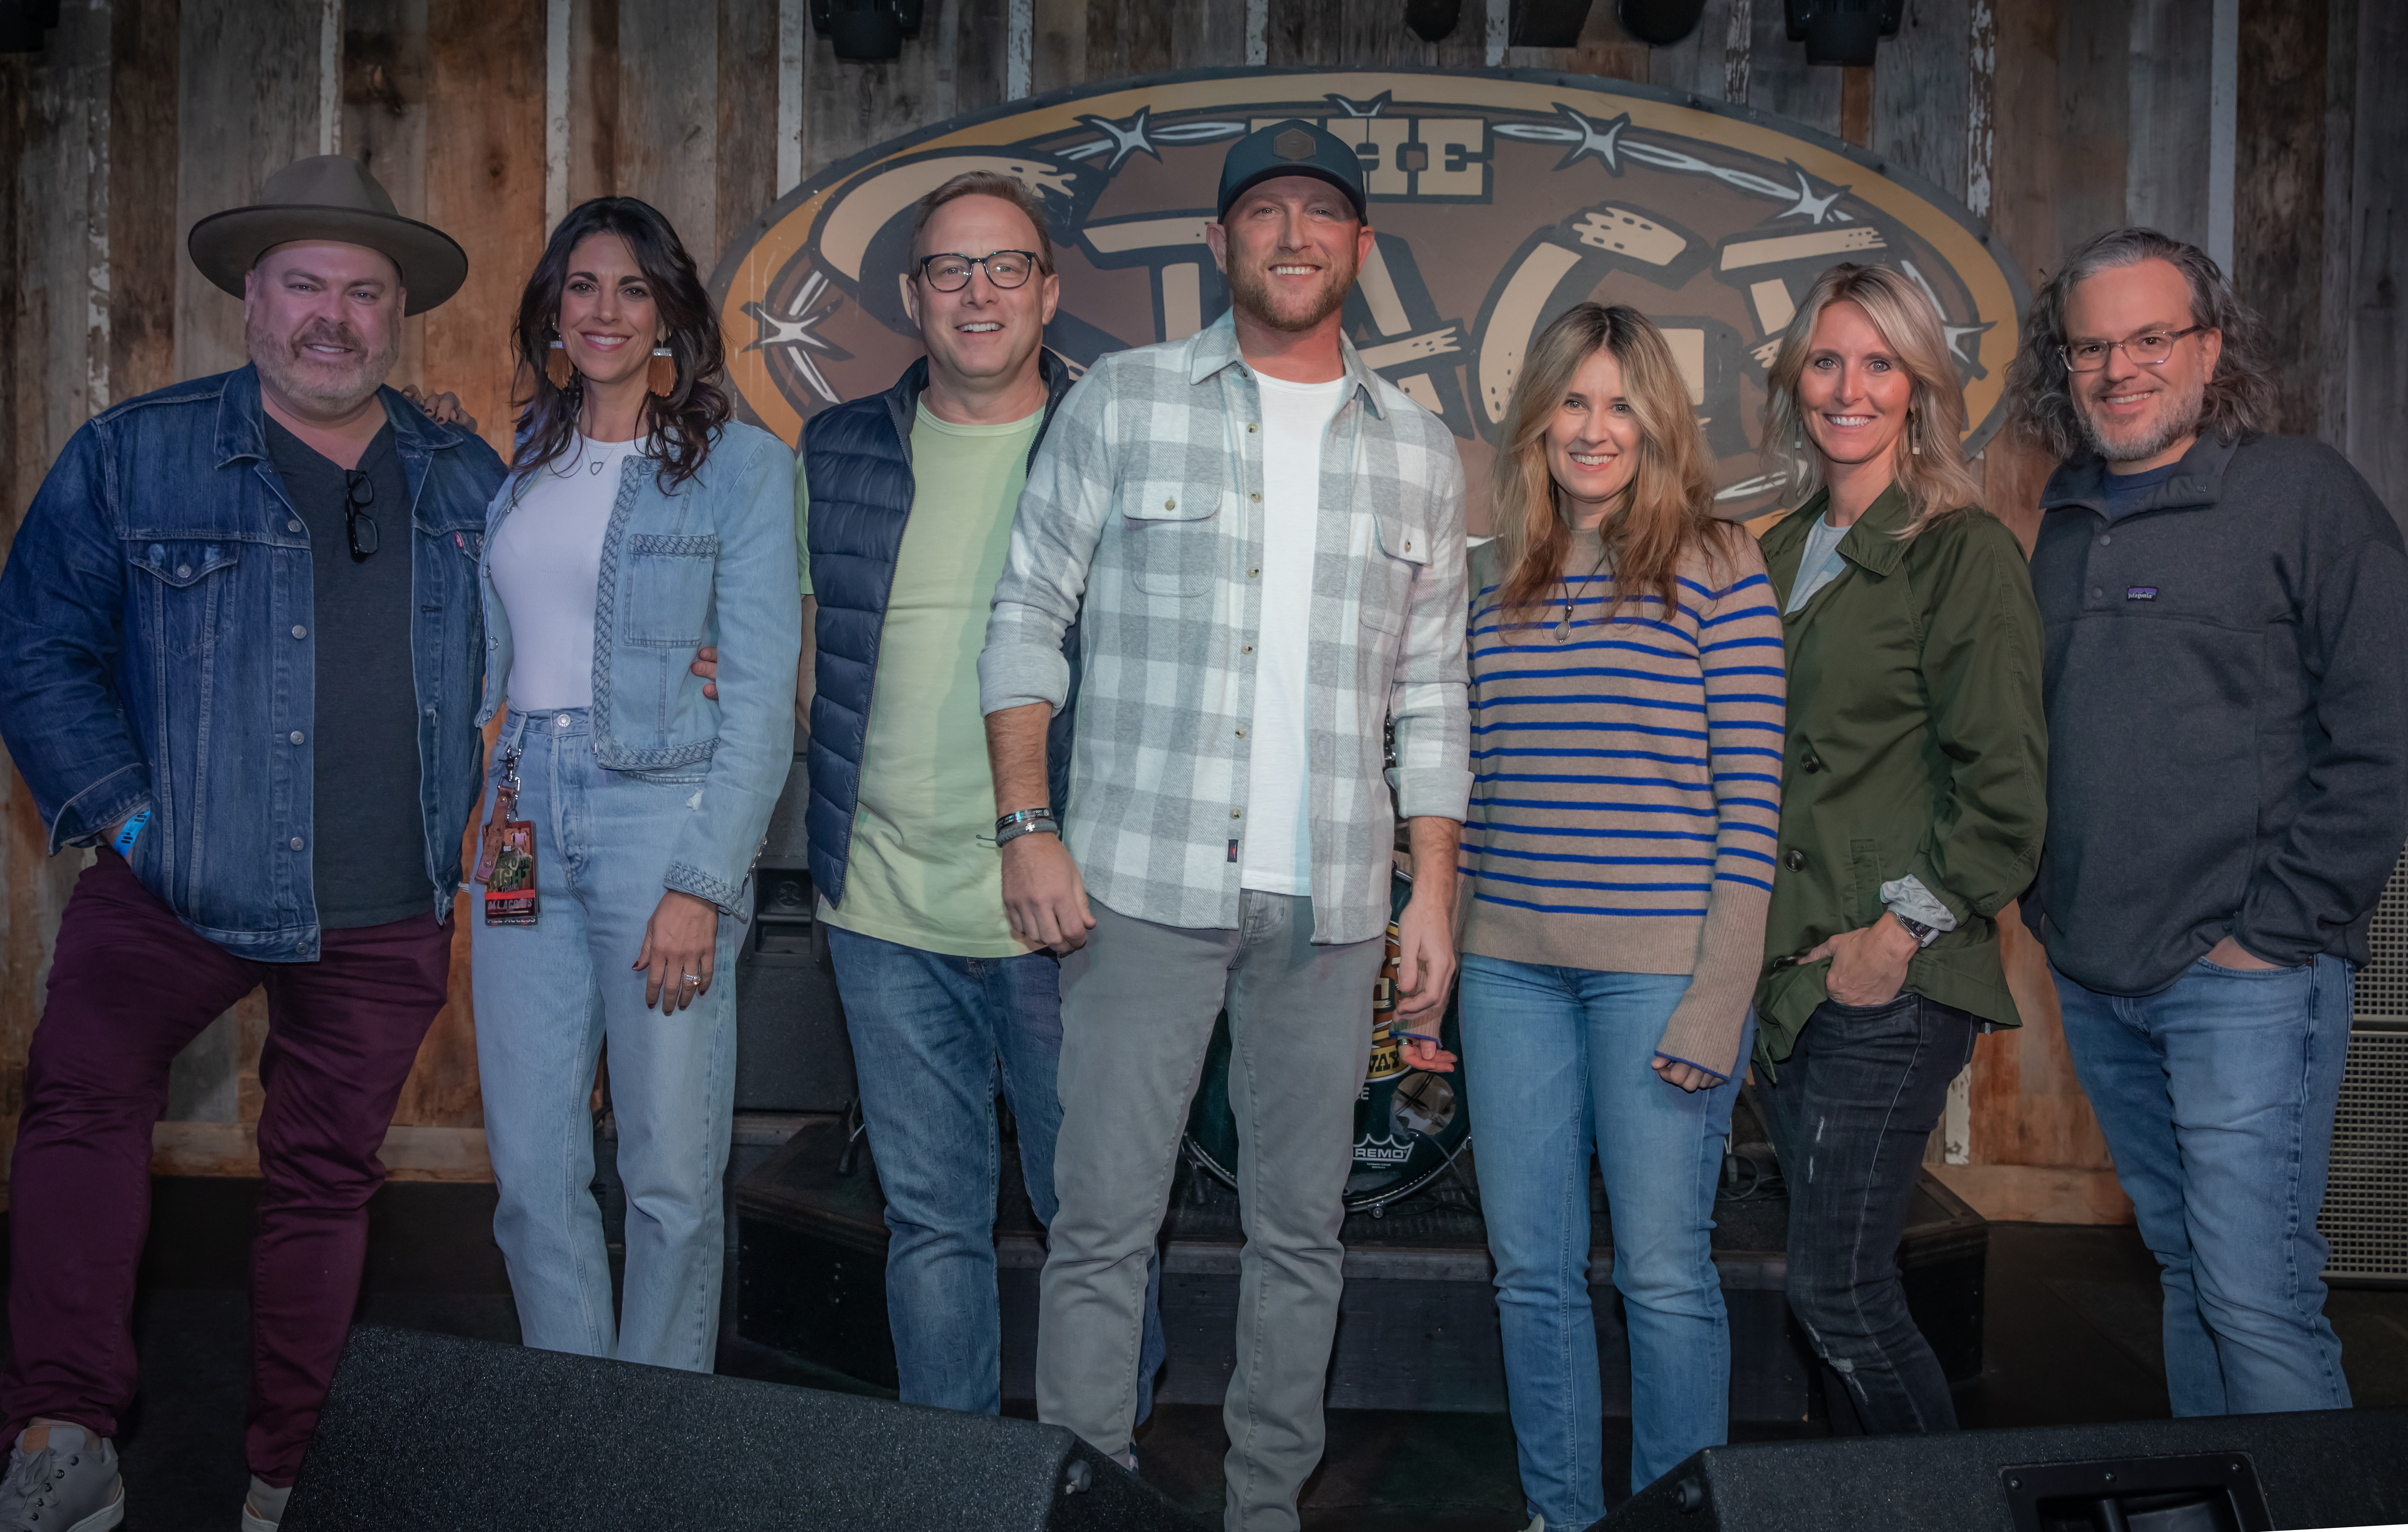 COLE SWINDELL PLAYS TWO SOLD OUT RYMAN SHOWS